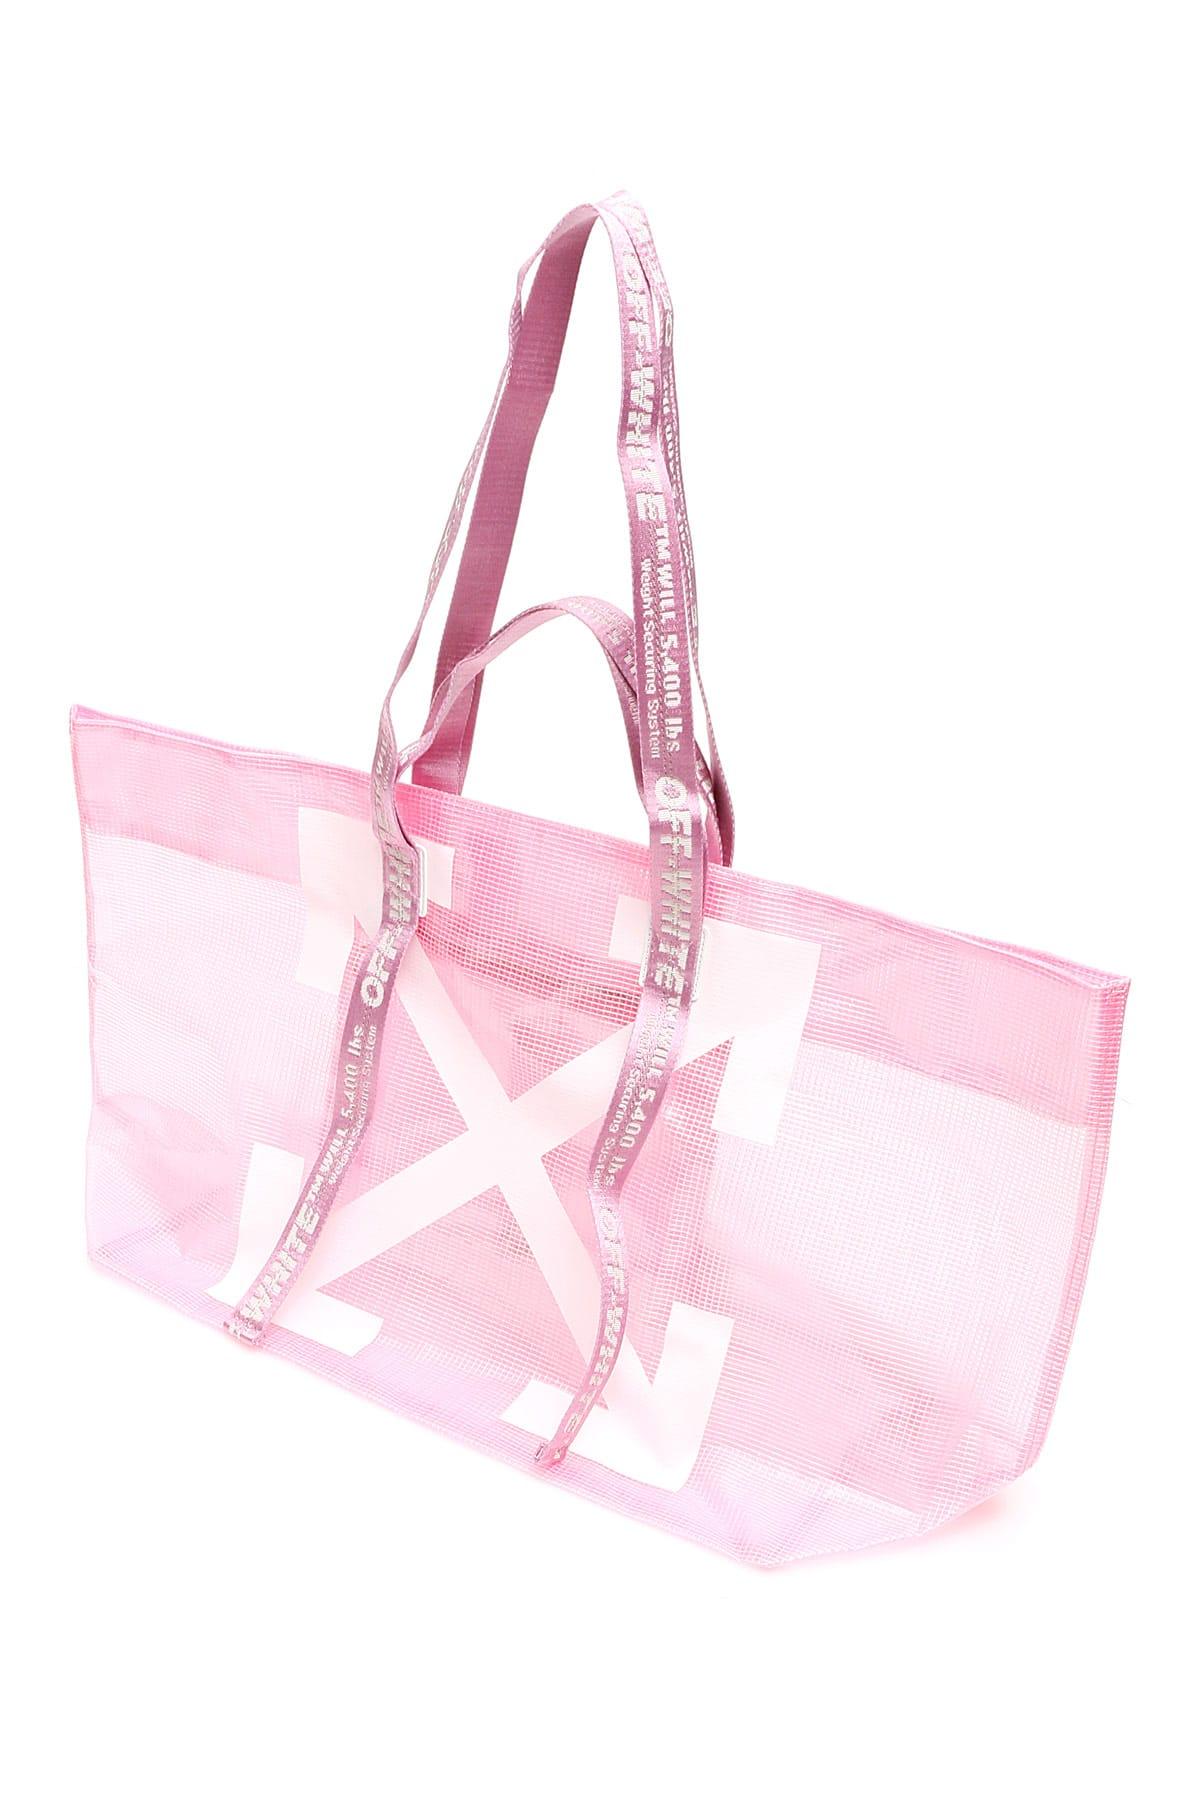 Off-White c/o Virgil Abloh Jitney 2.8 Sprayed Ombre Bag in Pink